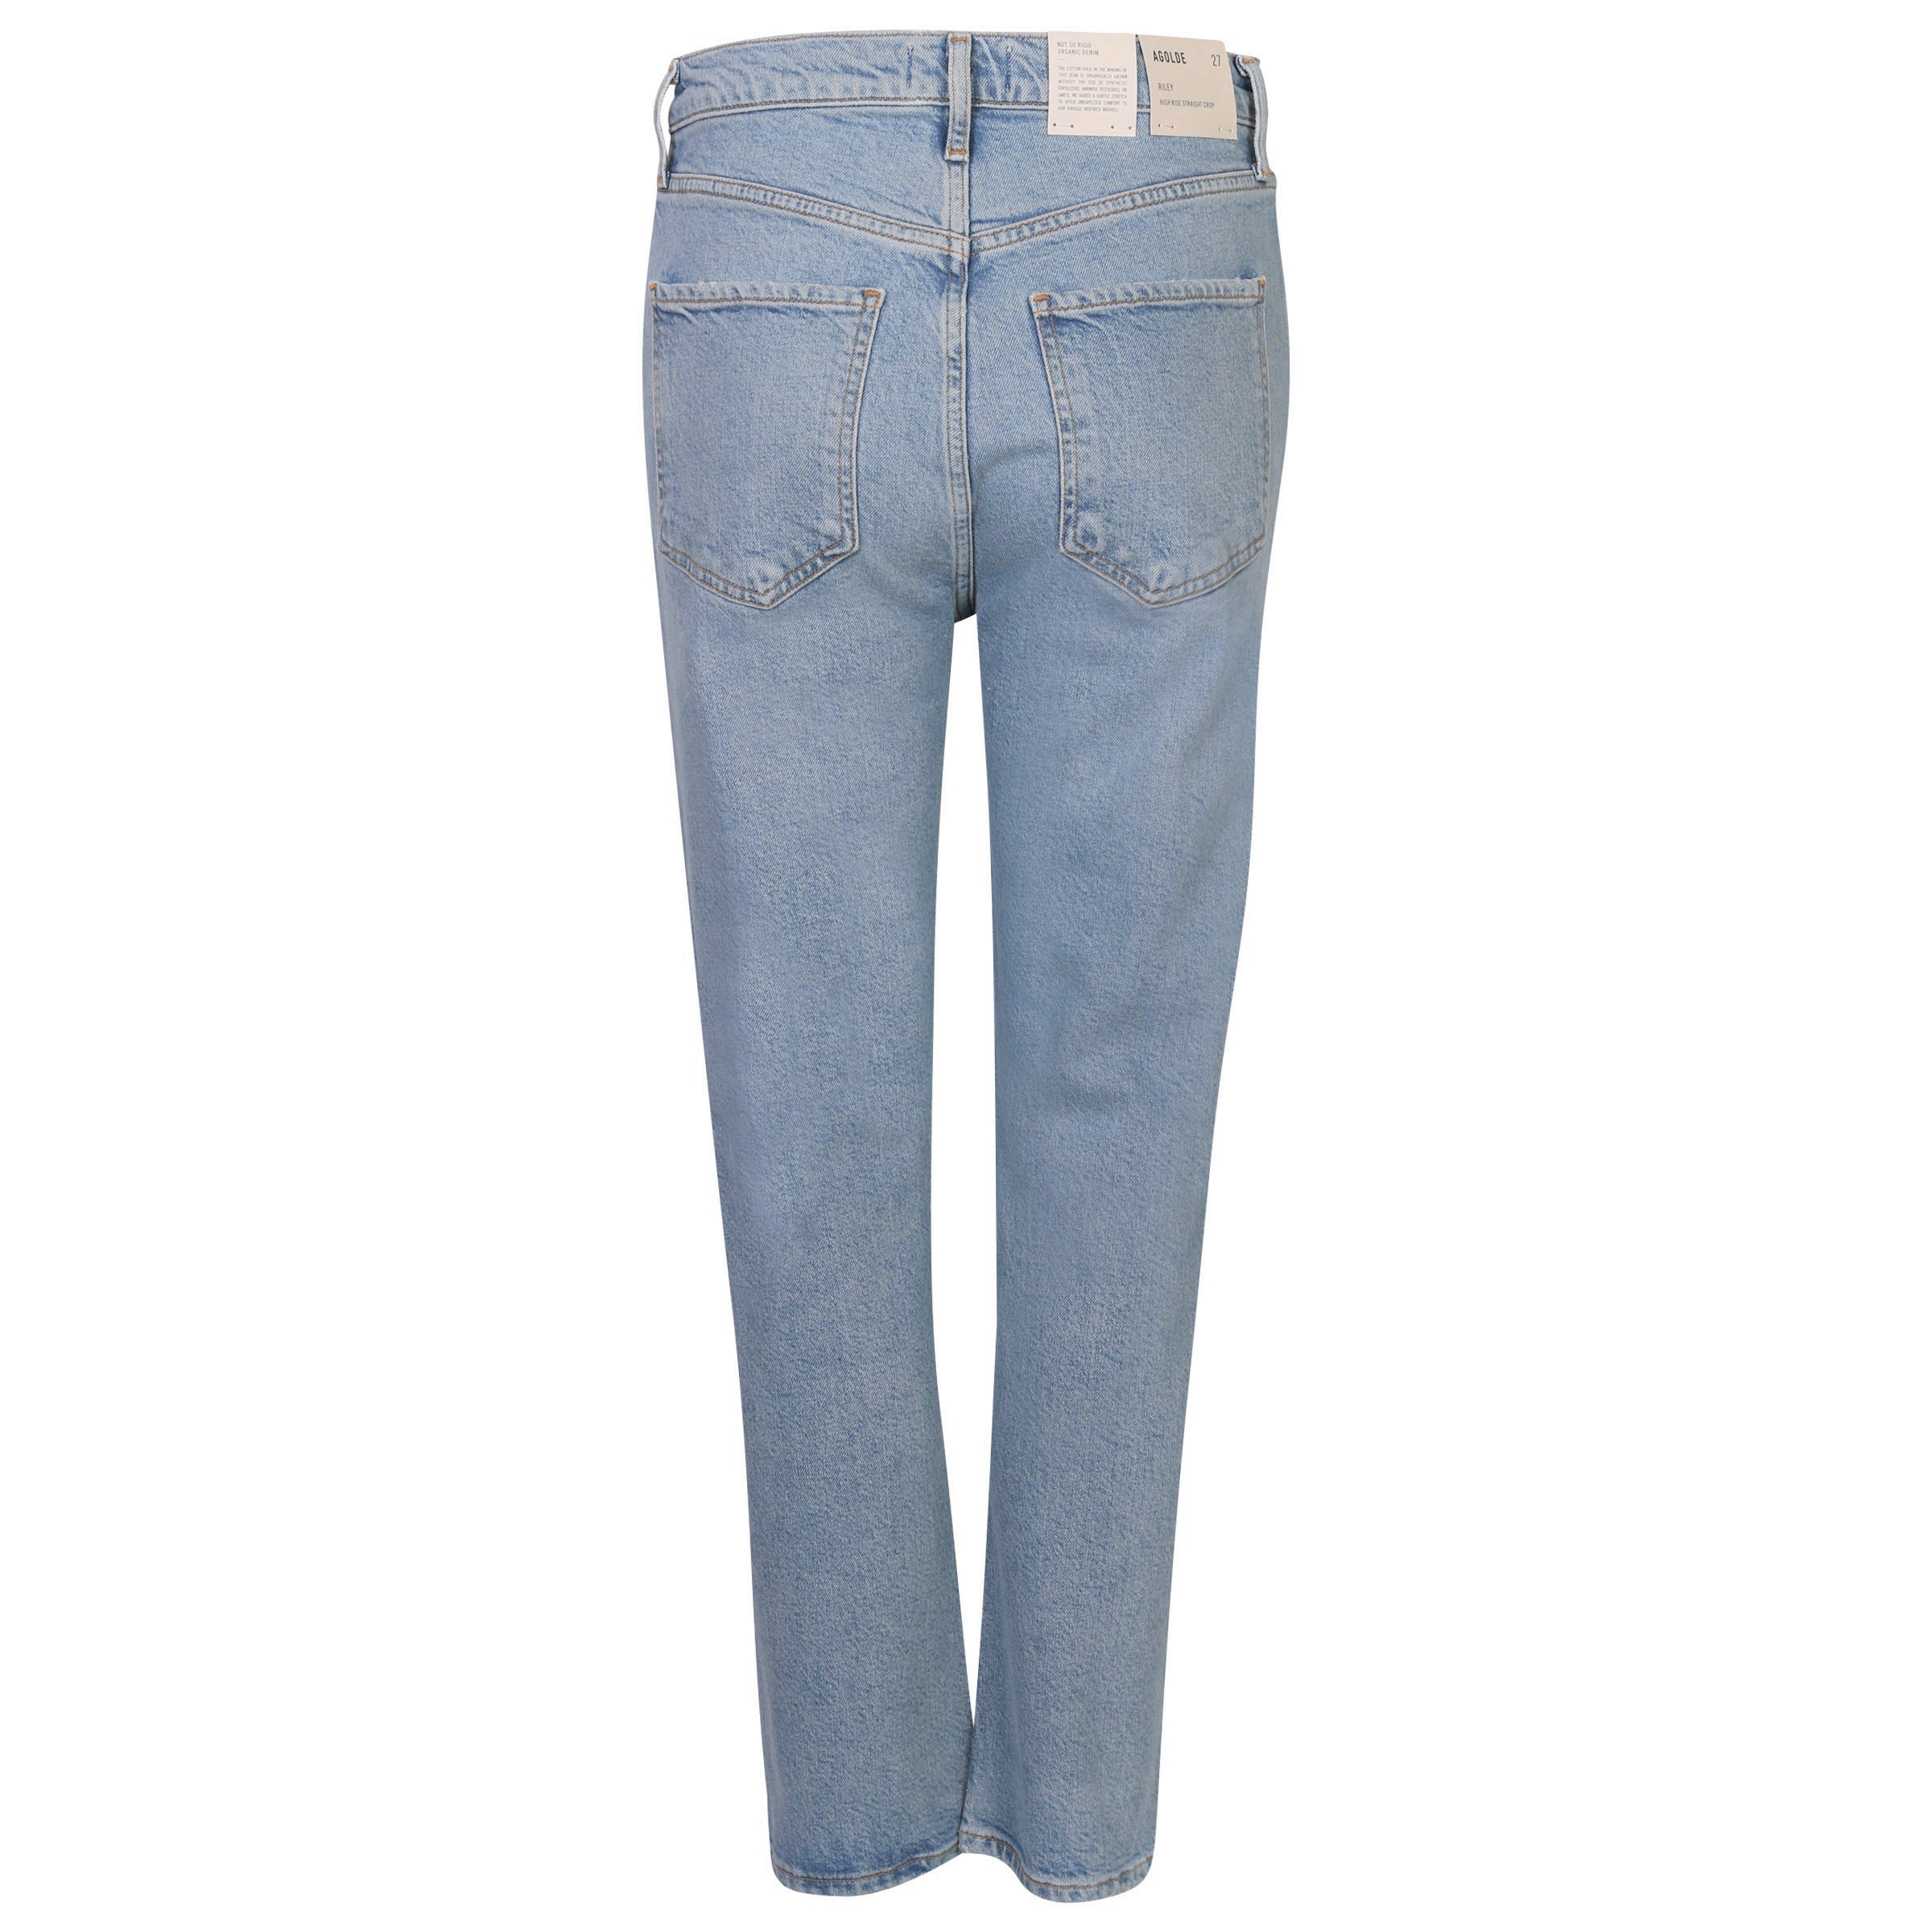 Agolde Jeans Riley in Light Blue Wash Shiver